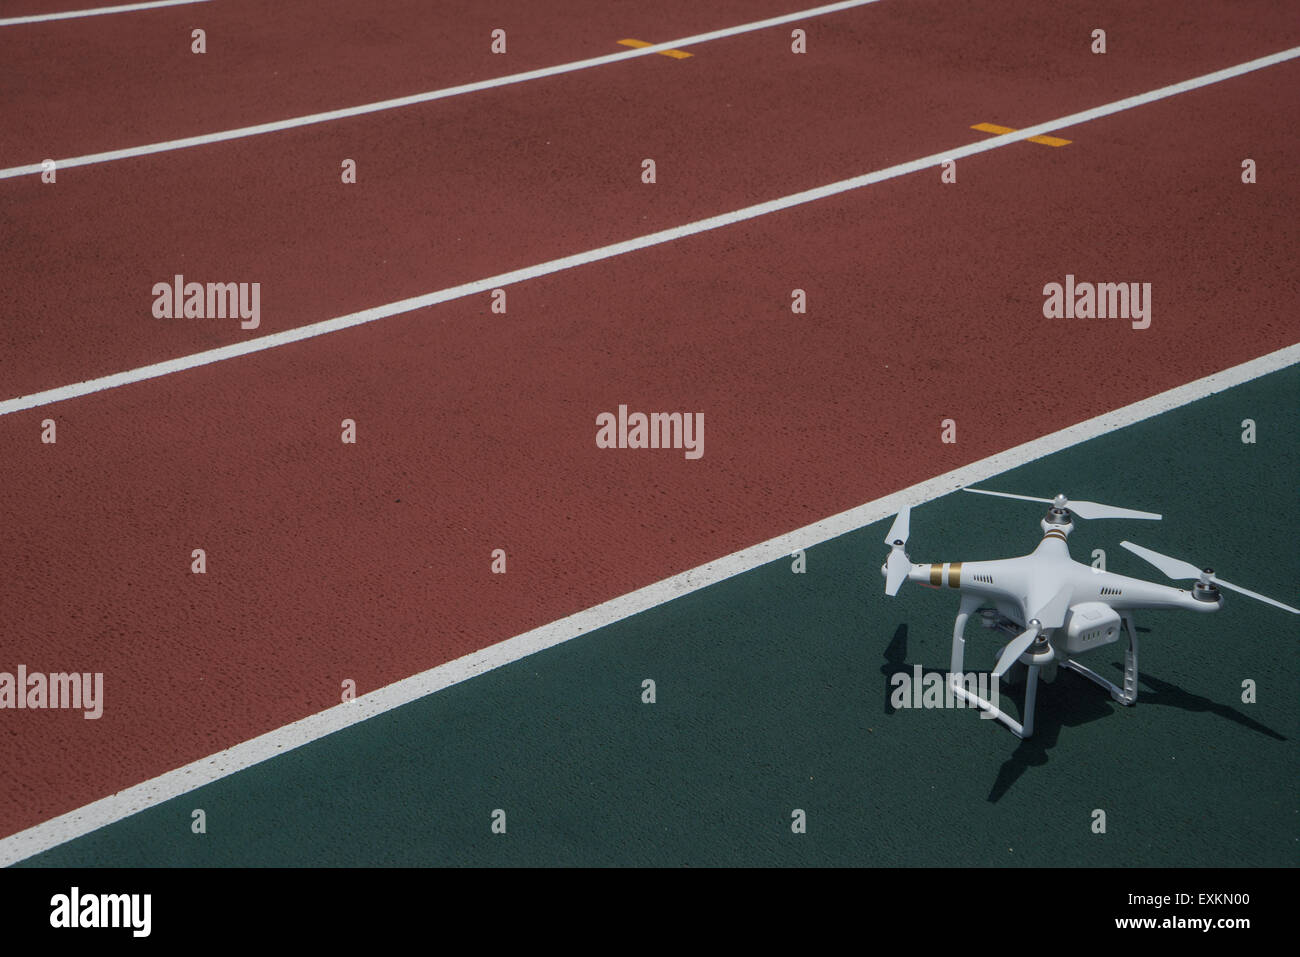 Quadcopter before departure on race track, Tokyo, Japan Stock Photo